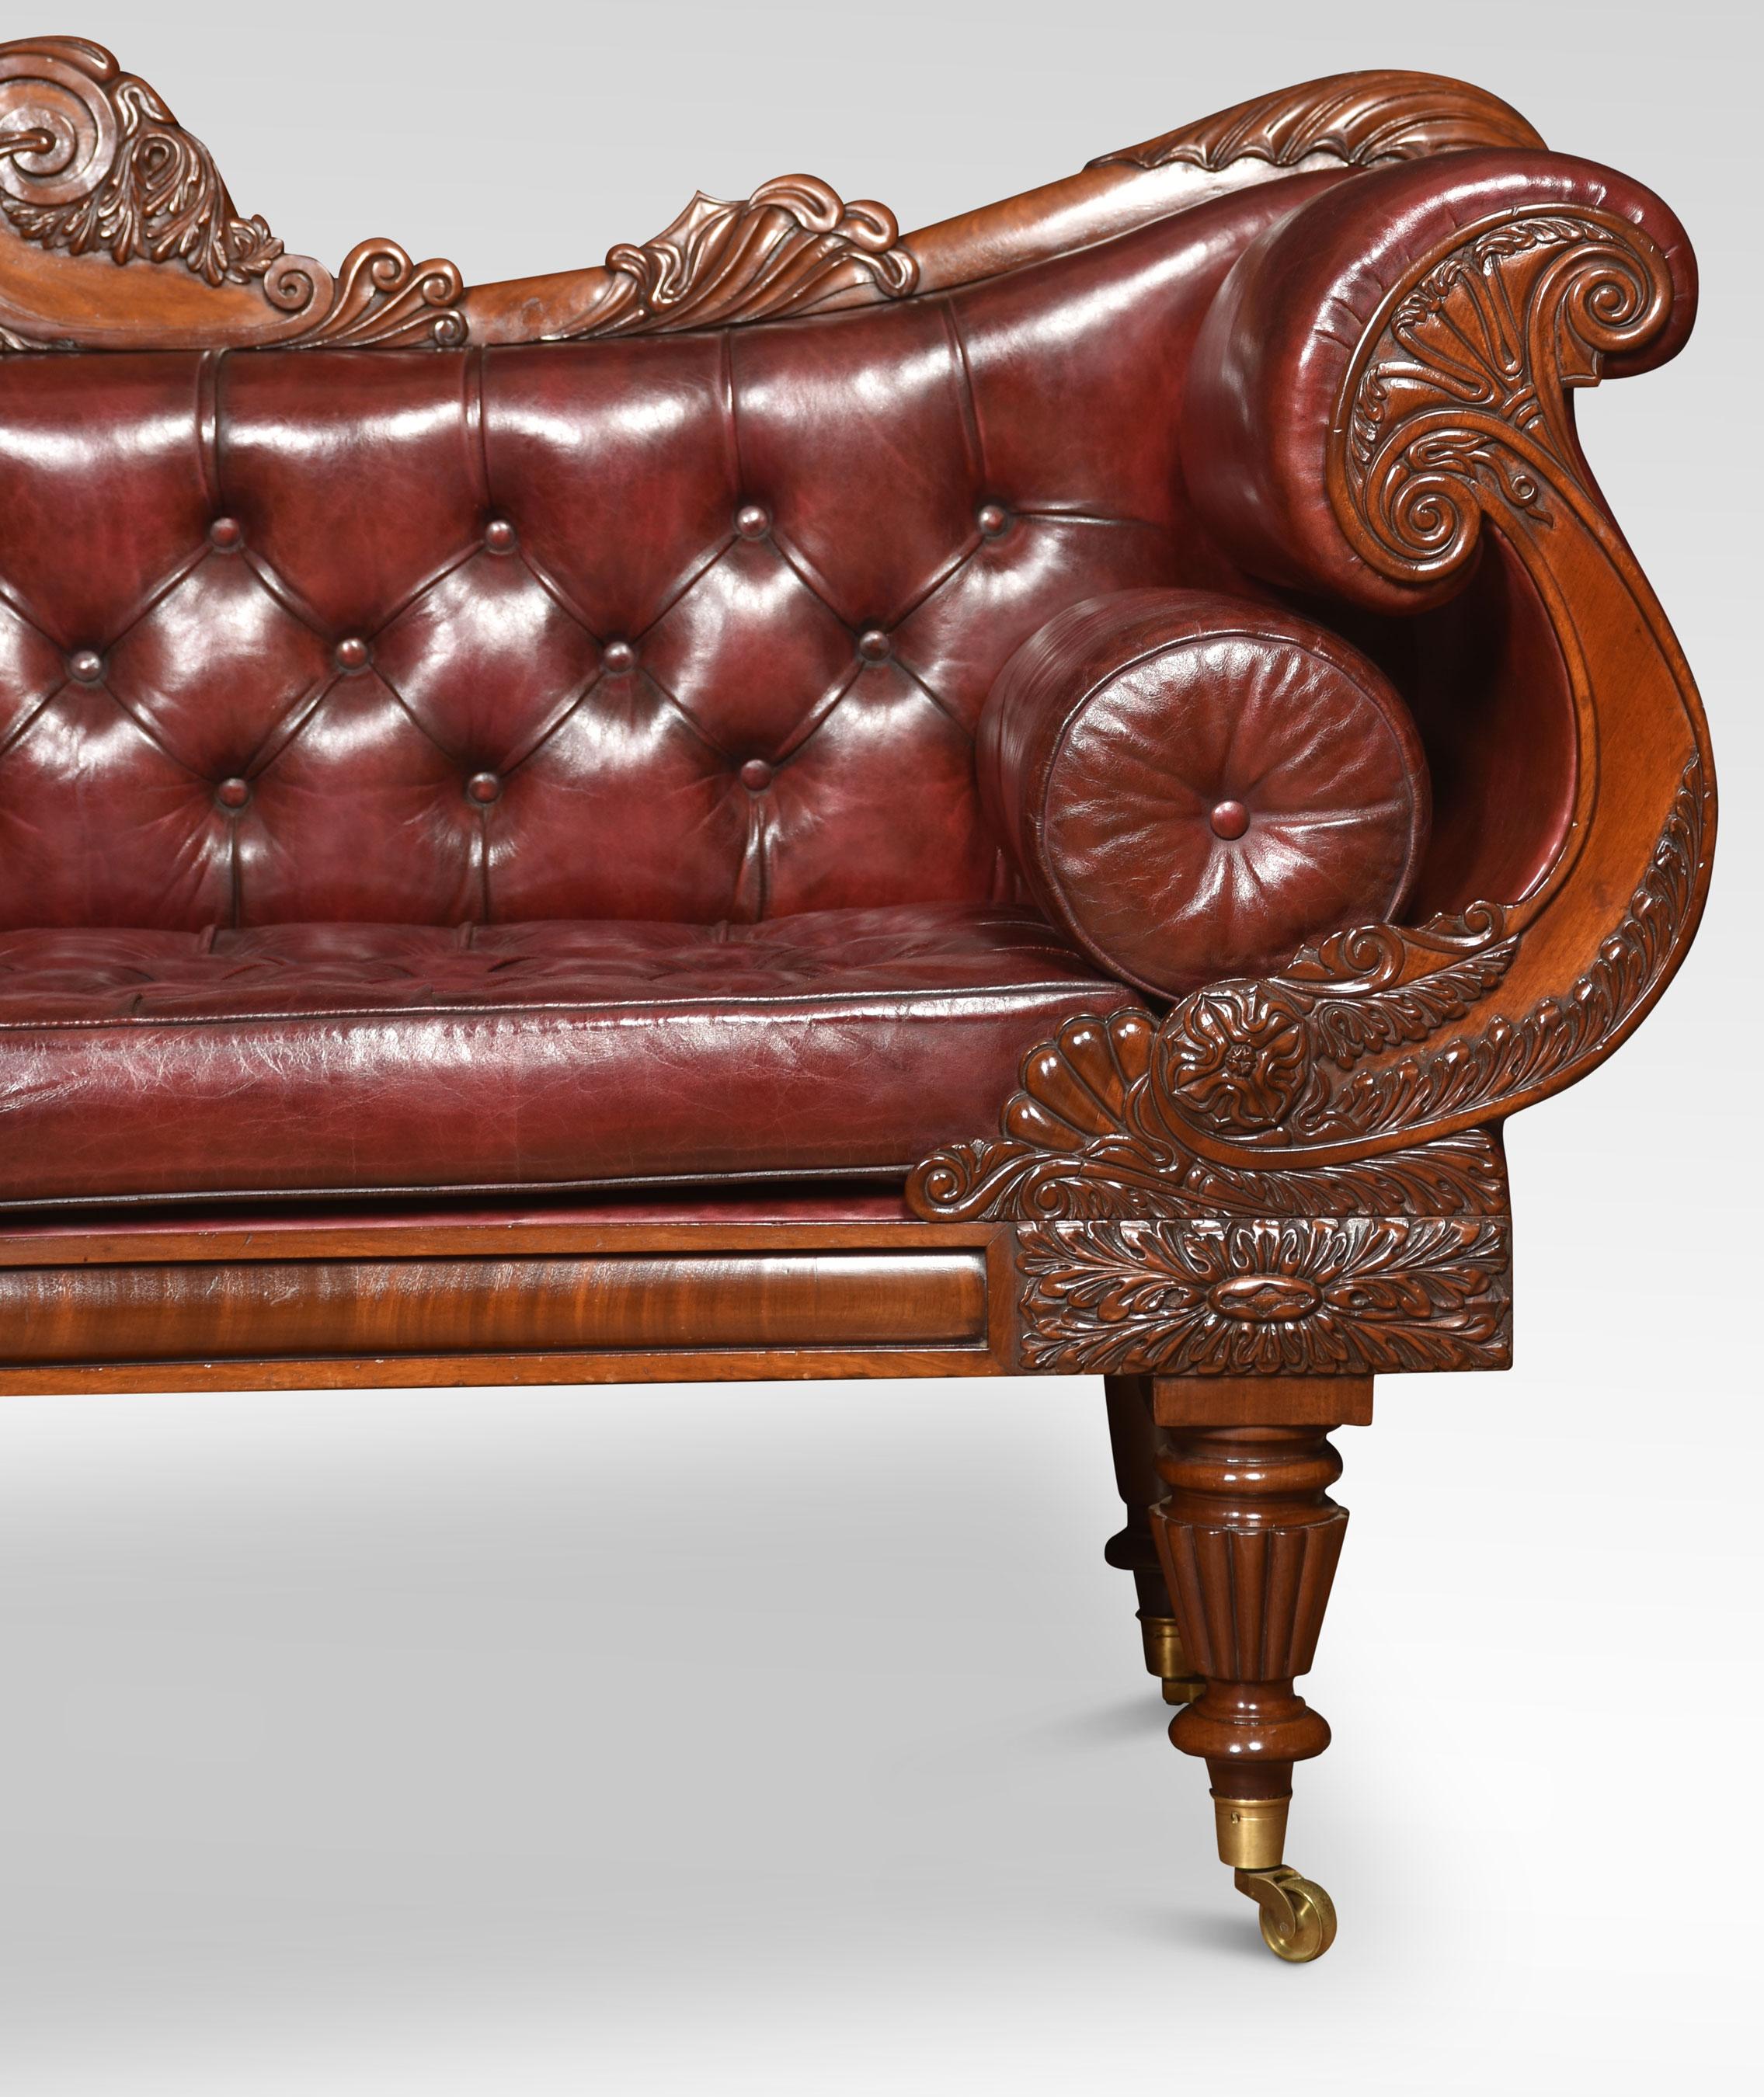 Early 19th-century mahogany framed scroll end settee, the acanthus scrolling arched top rail above deep buttoned back and seat flanked by scrolling burgundy leather arms. Standing on foliated carved tapered reeded legs with brass caps and